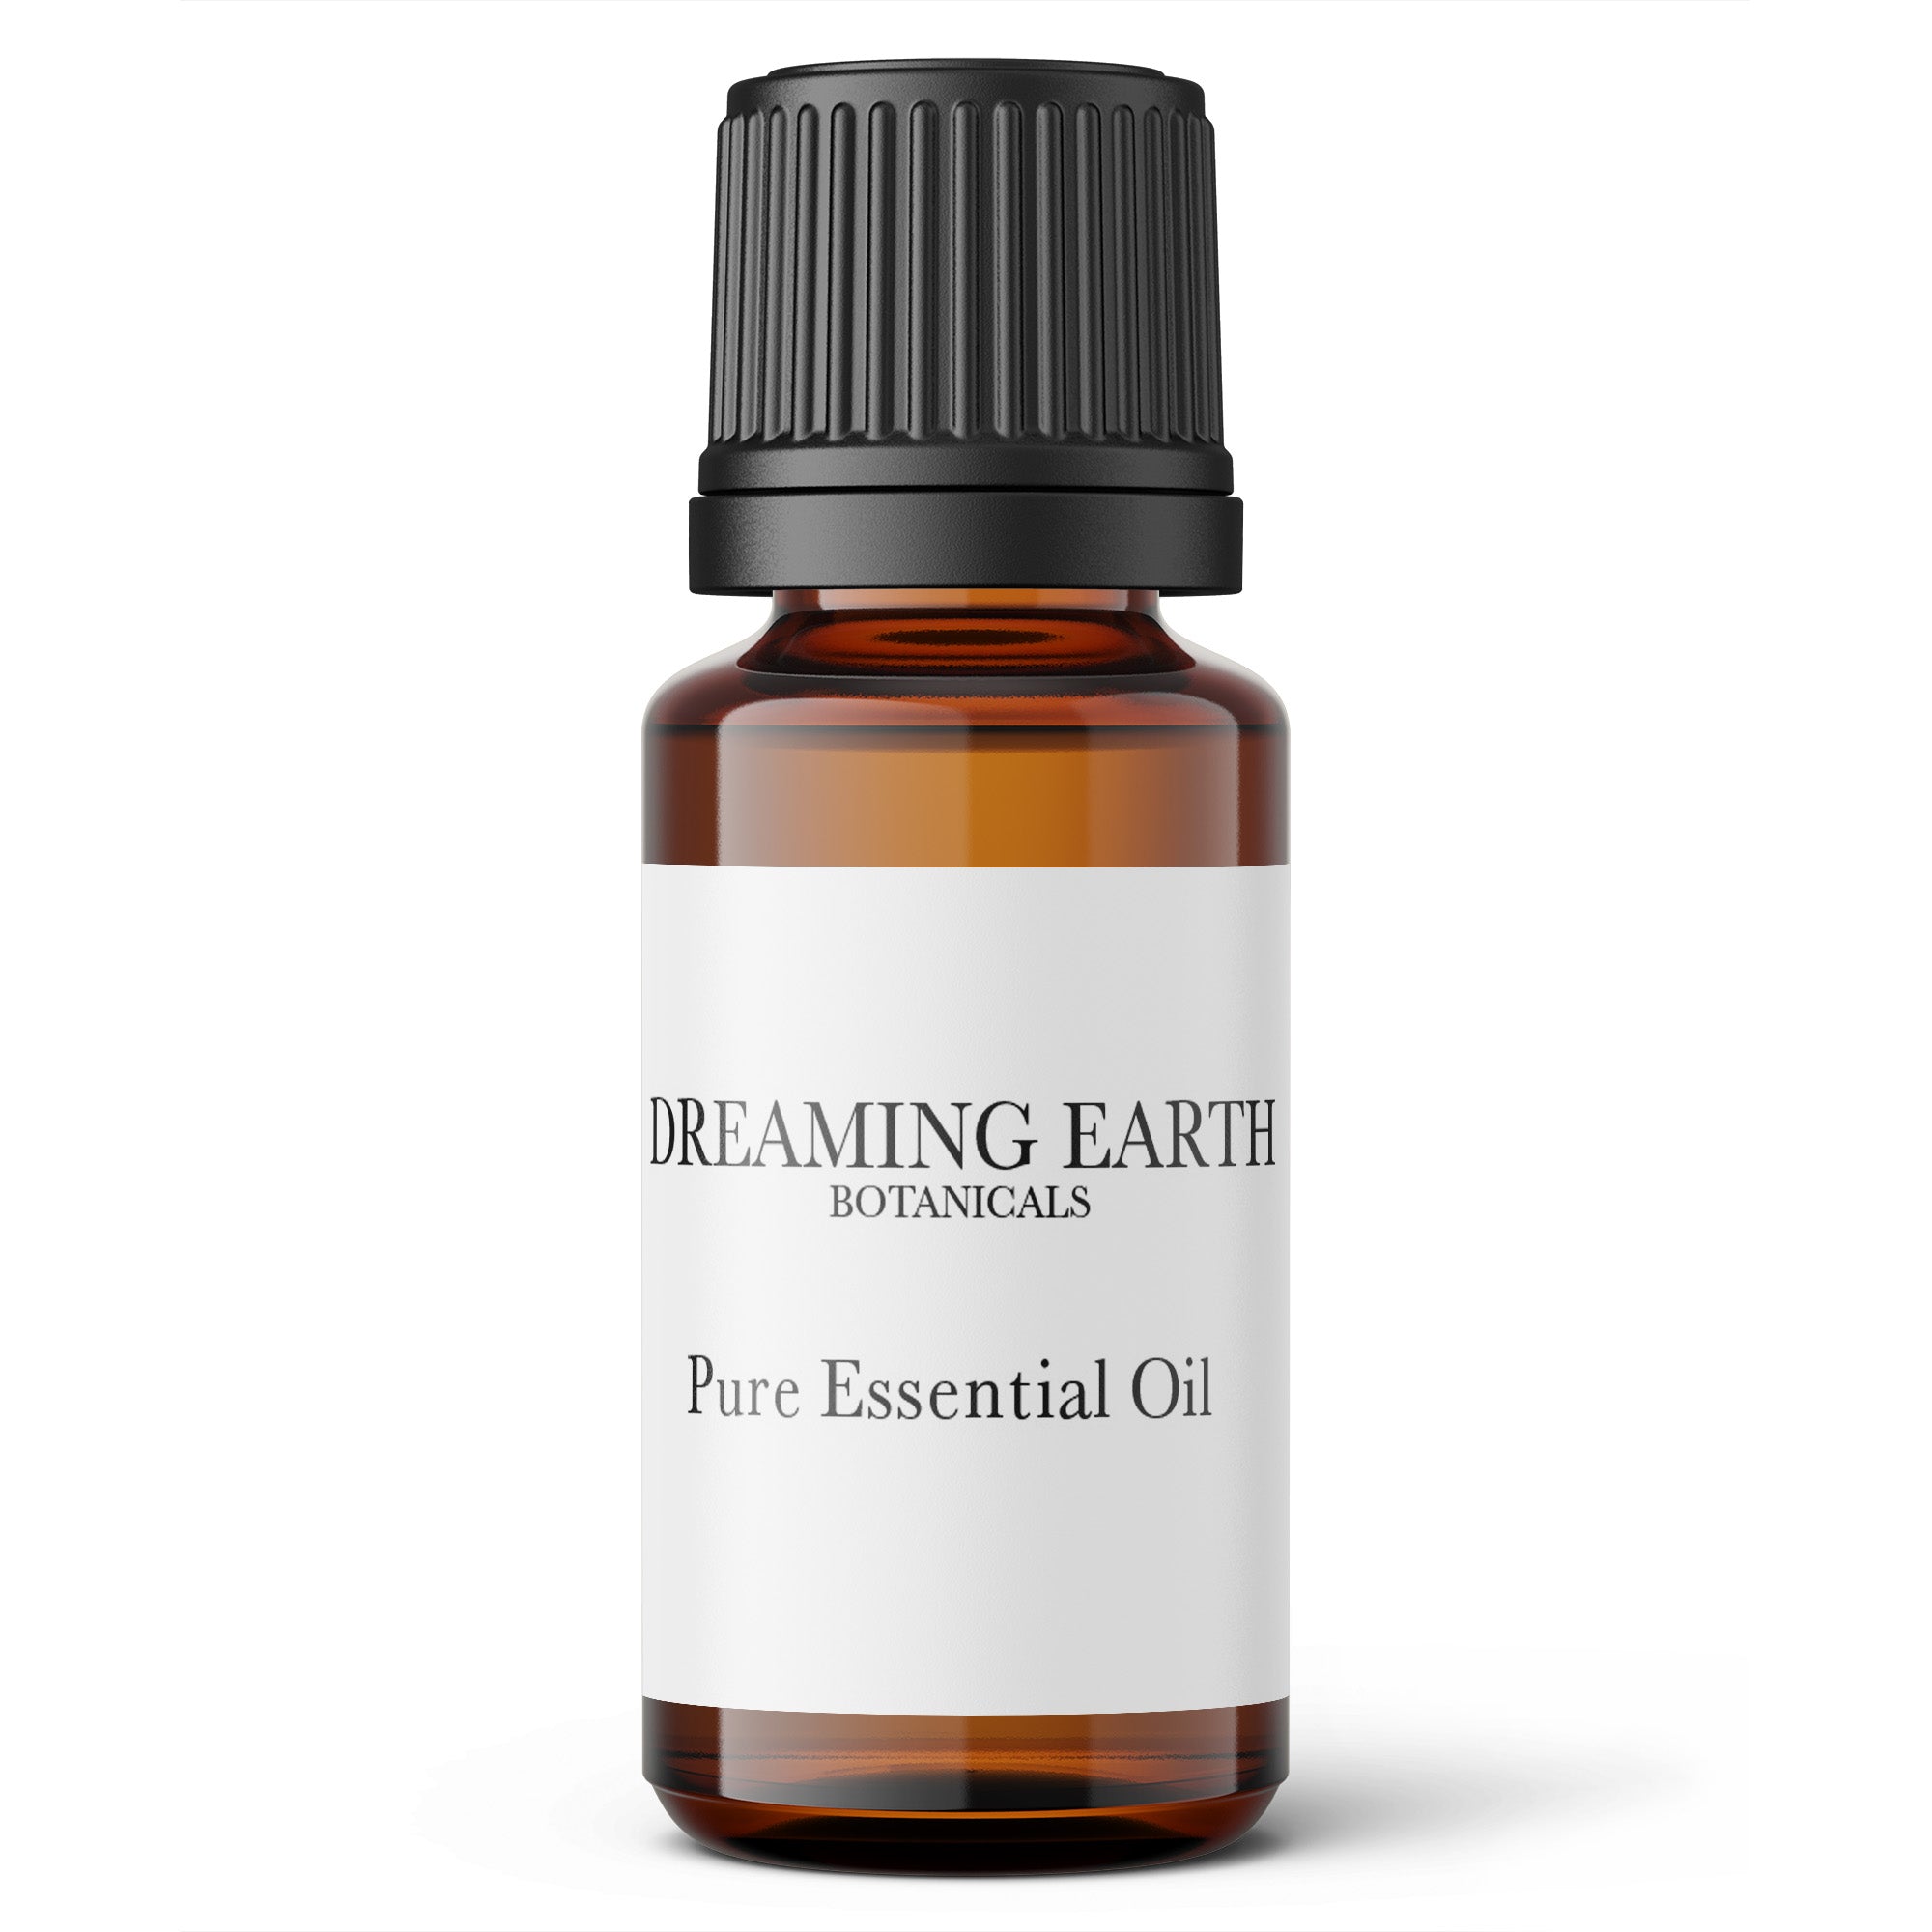 Load image into Gallery viewer, Geranium Essential Oil, Egypt - Dreaming Earth Inc
